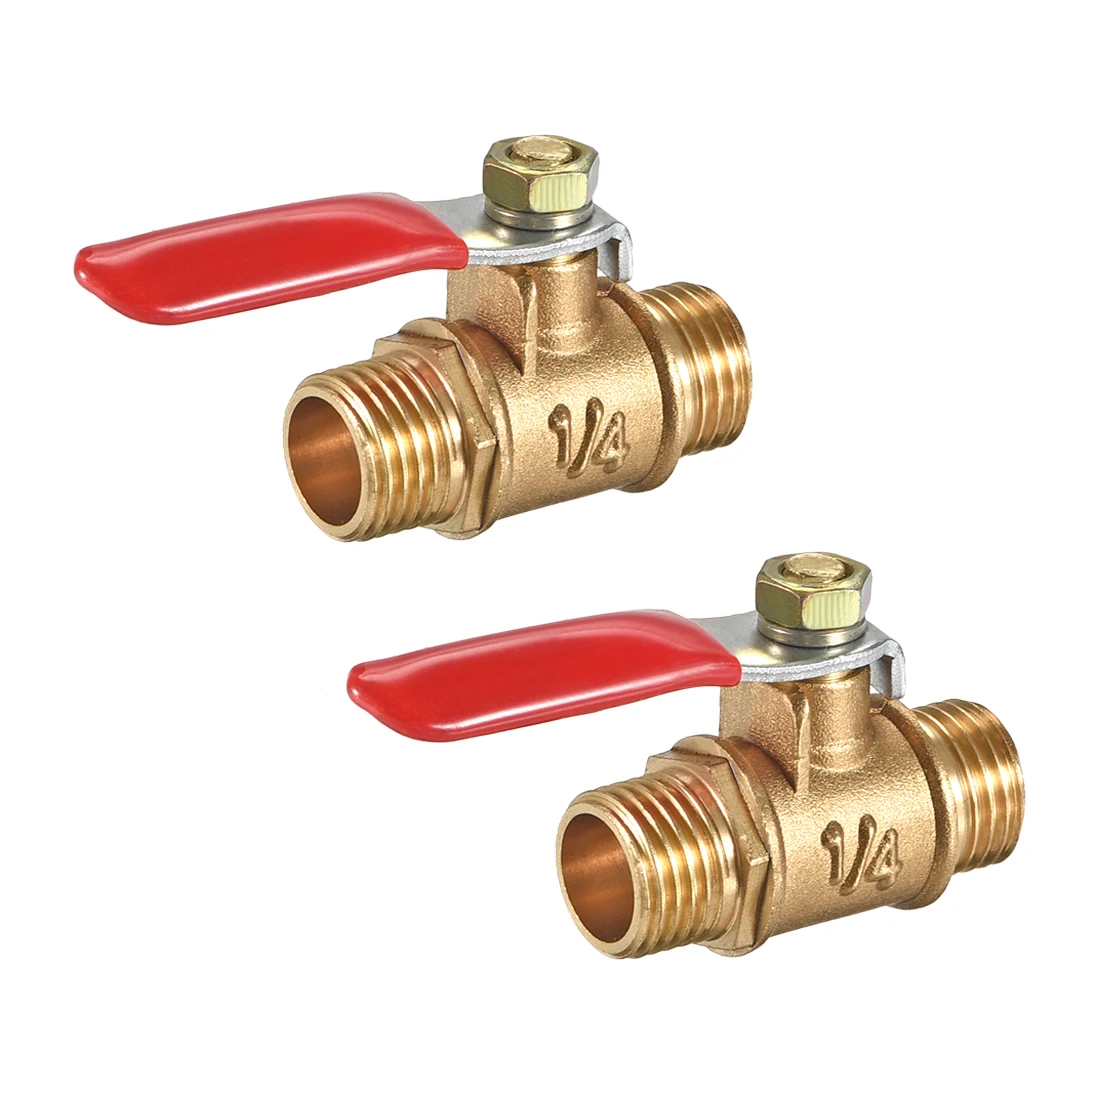 

uxcell Brass Air Ball Valve Shut Off Switch G1/4 Male to Male Pipe Coupler 2Pcs